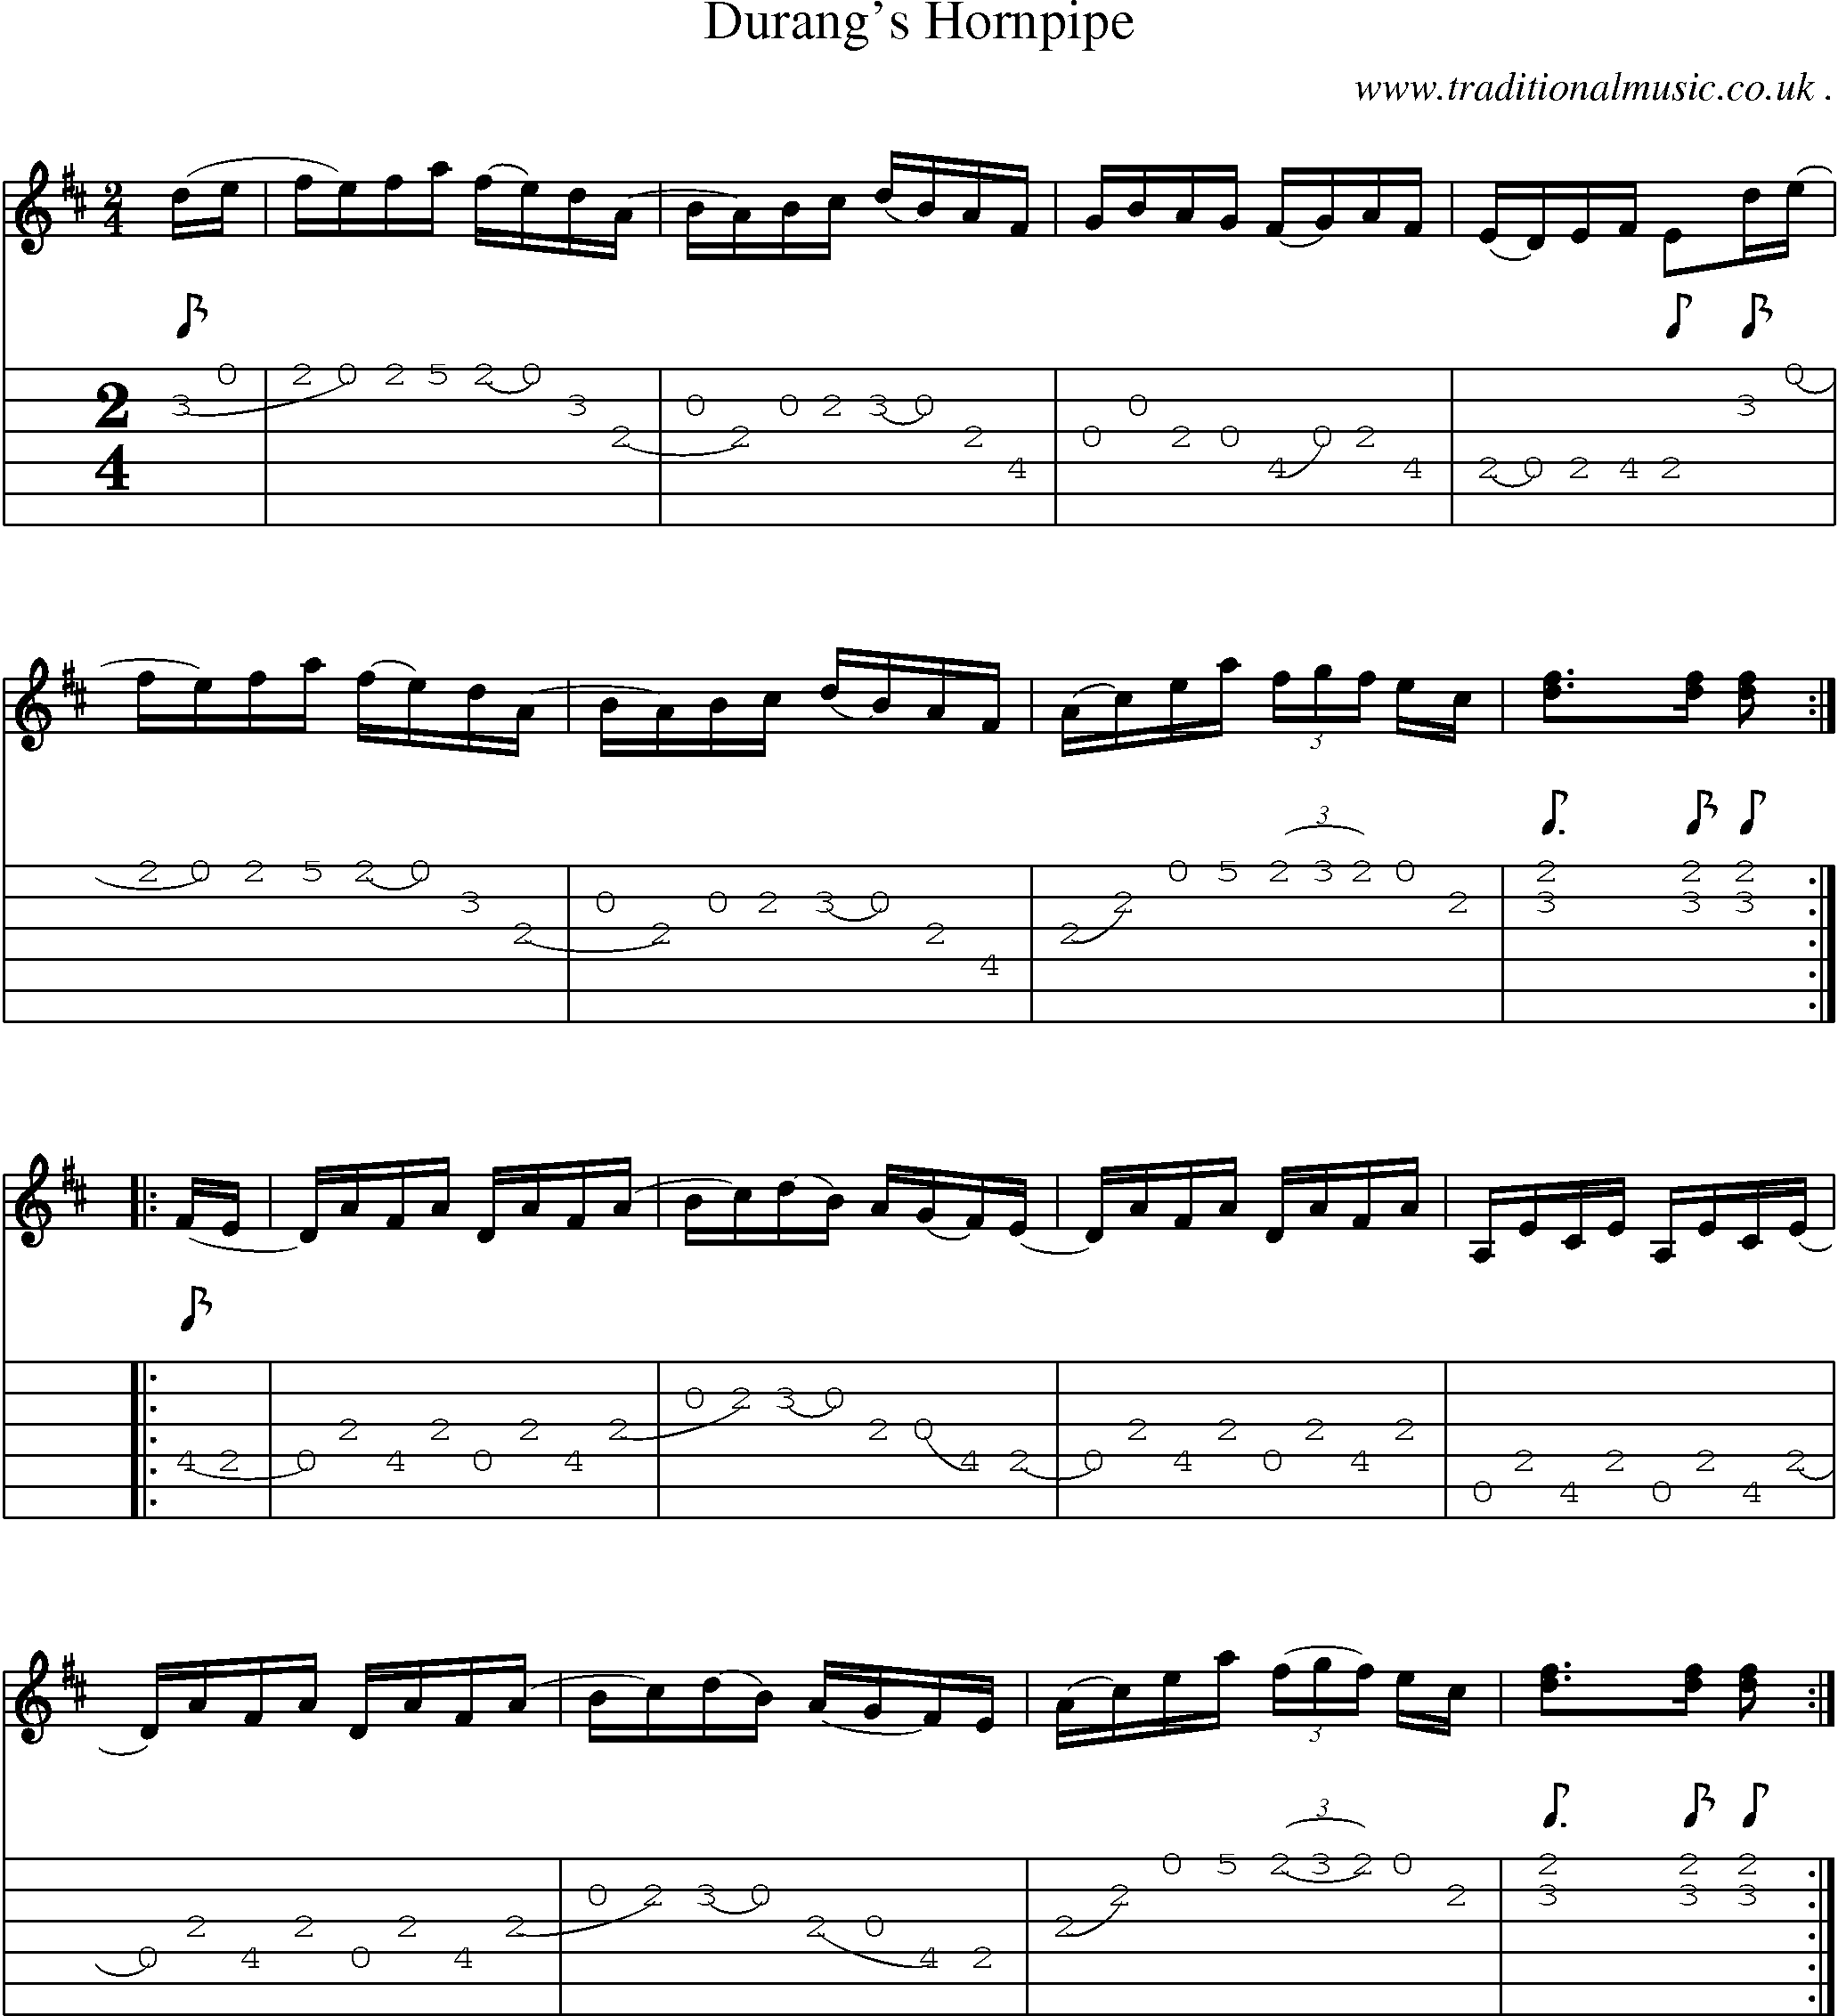 Music Score and Guitar Tabs for Durangs Hornpipe